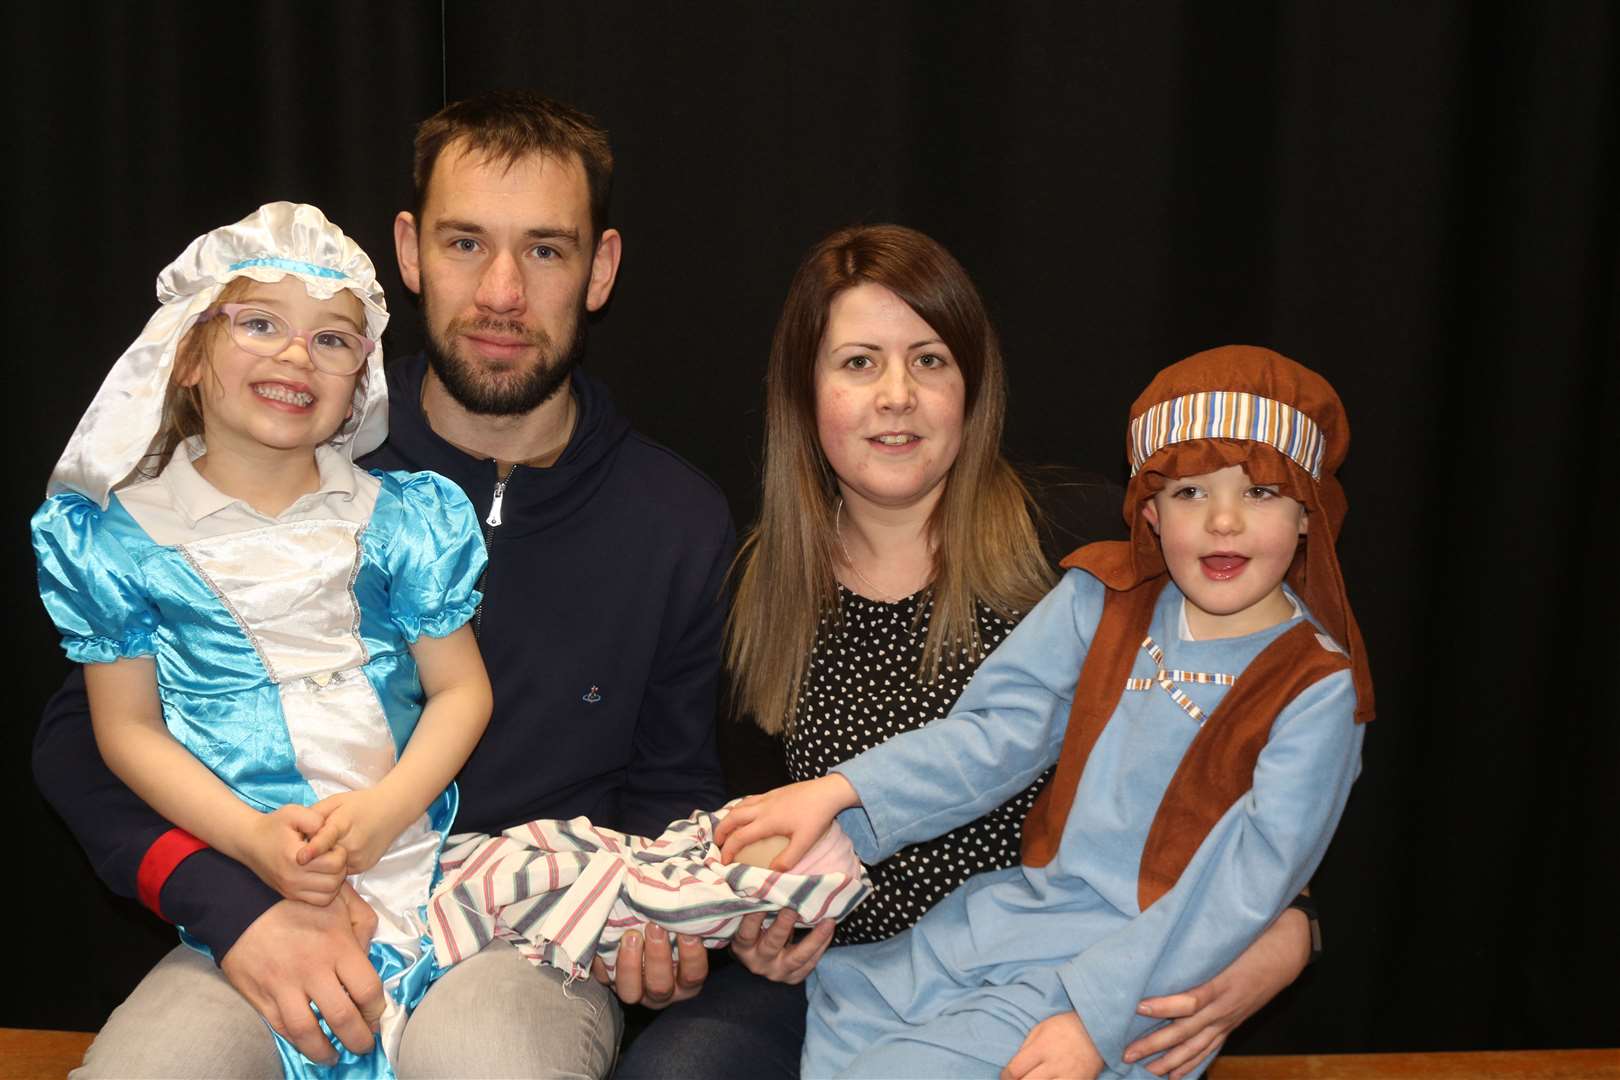 Alba Mackenzie and Jordan Shearer, who played Mary and Joseph, with their respective parents Marc Mackenzie and Claire Shearer.